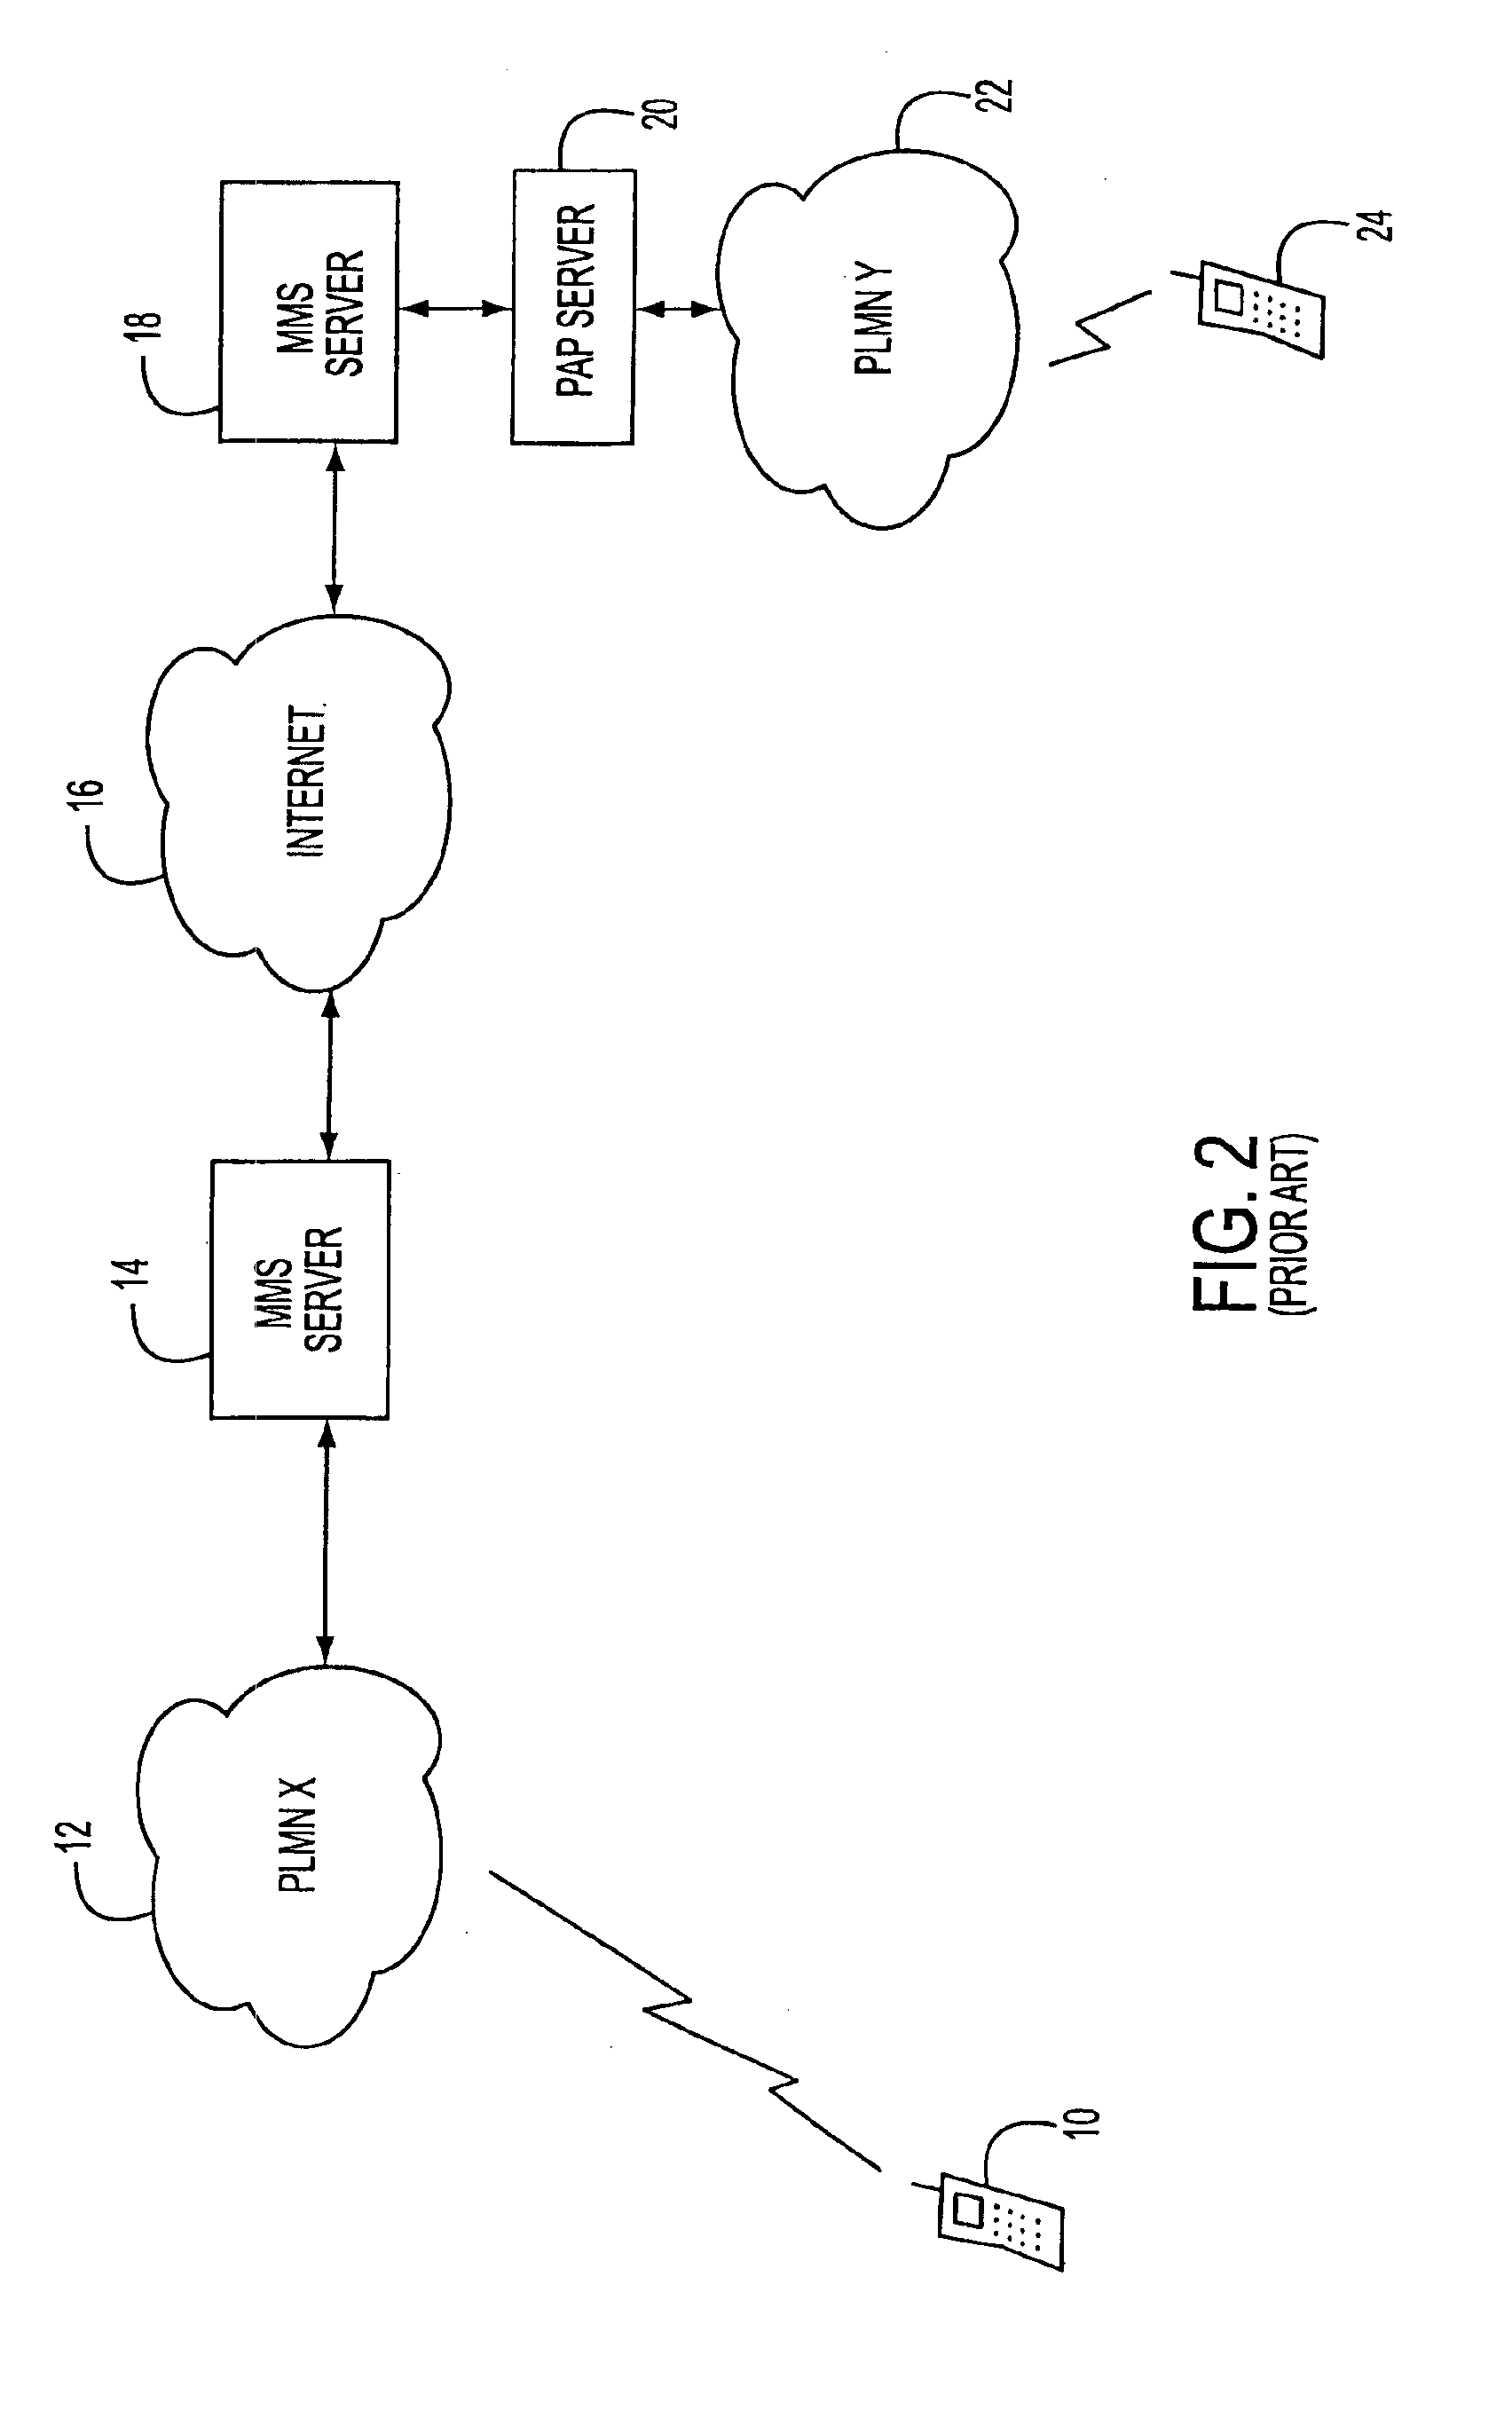 Multimedia messaging service routing system and method